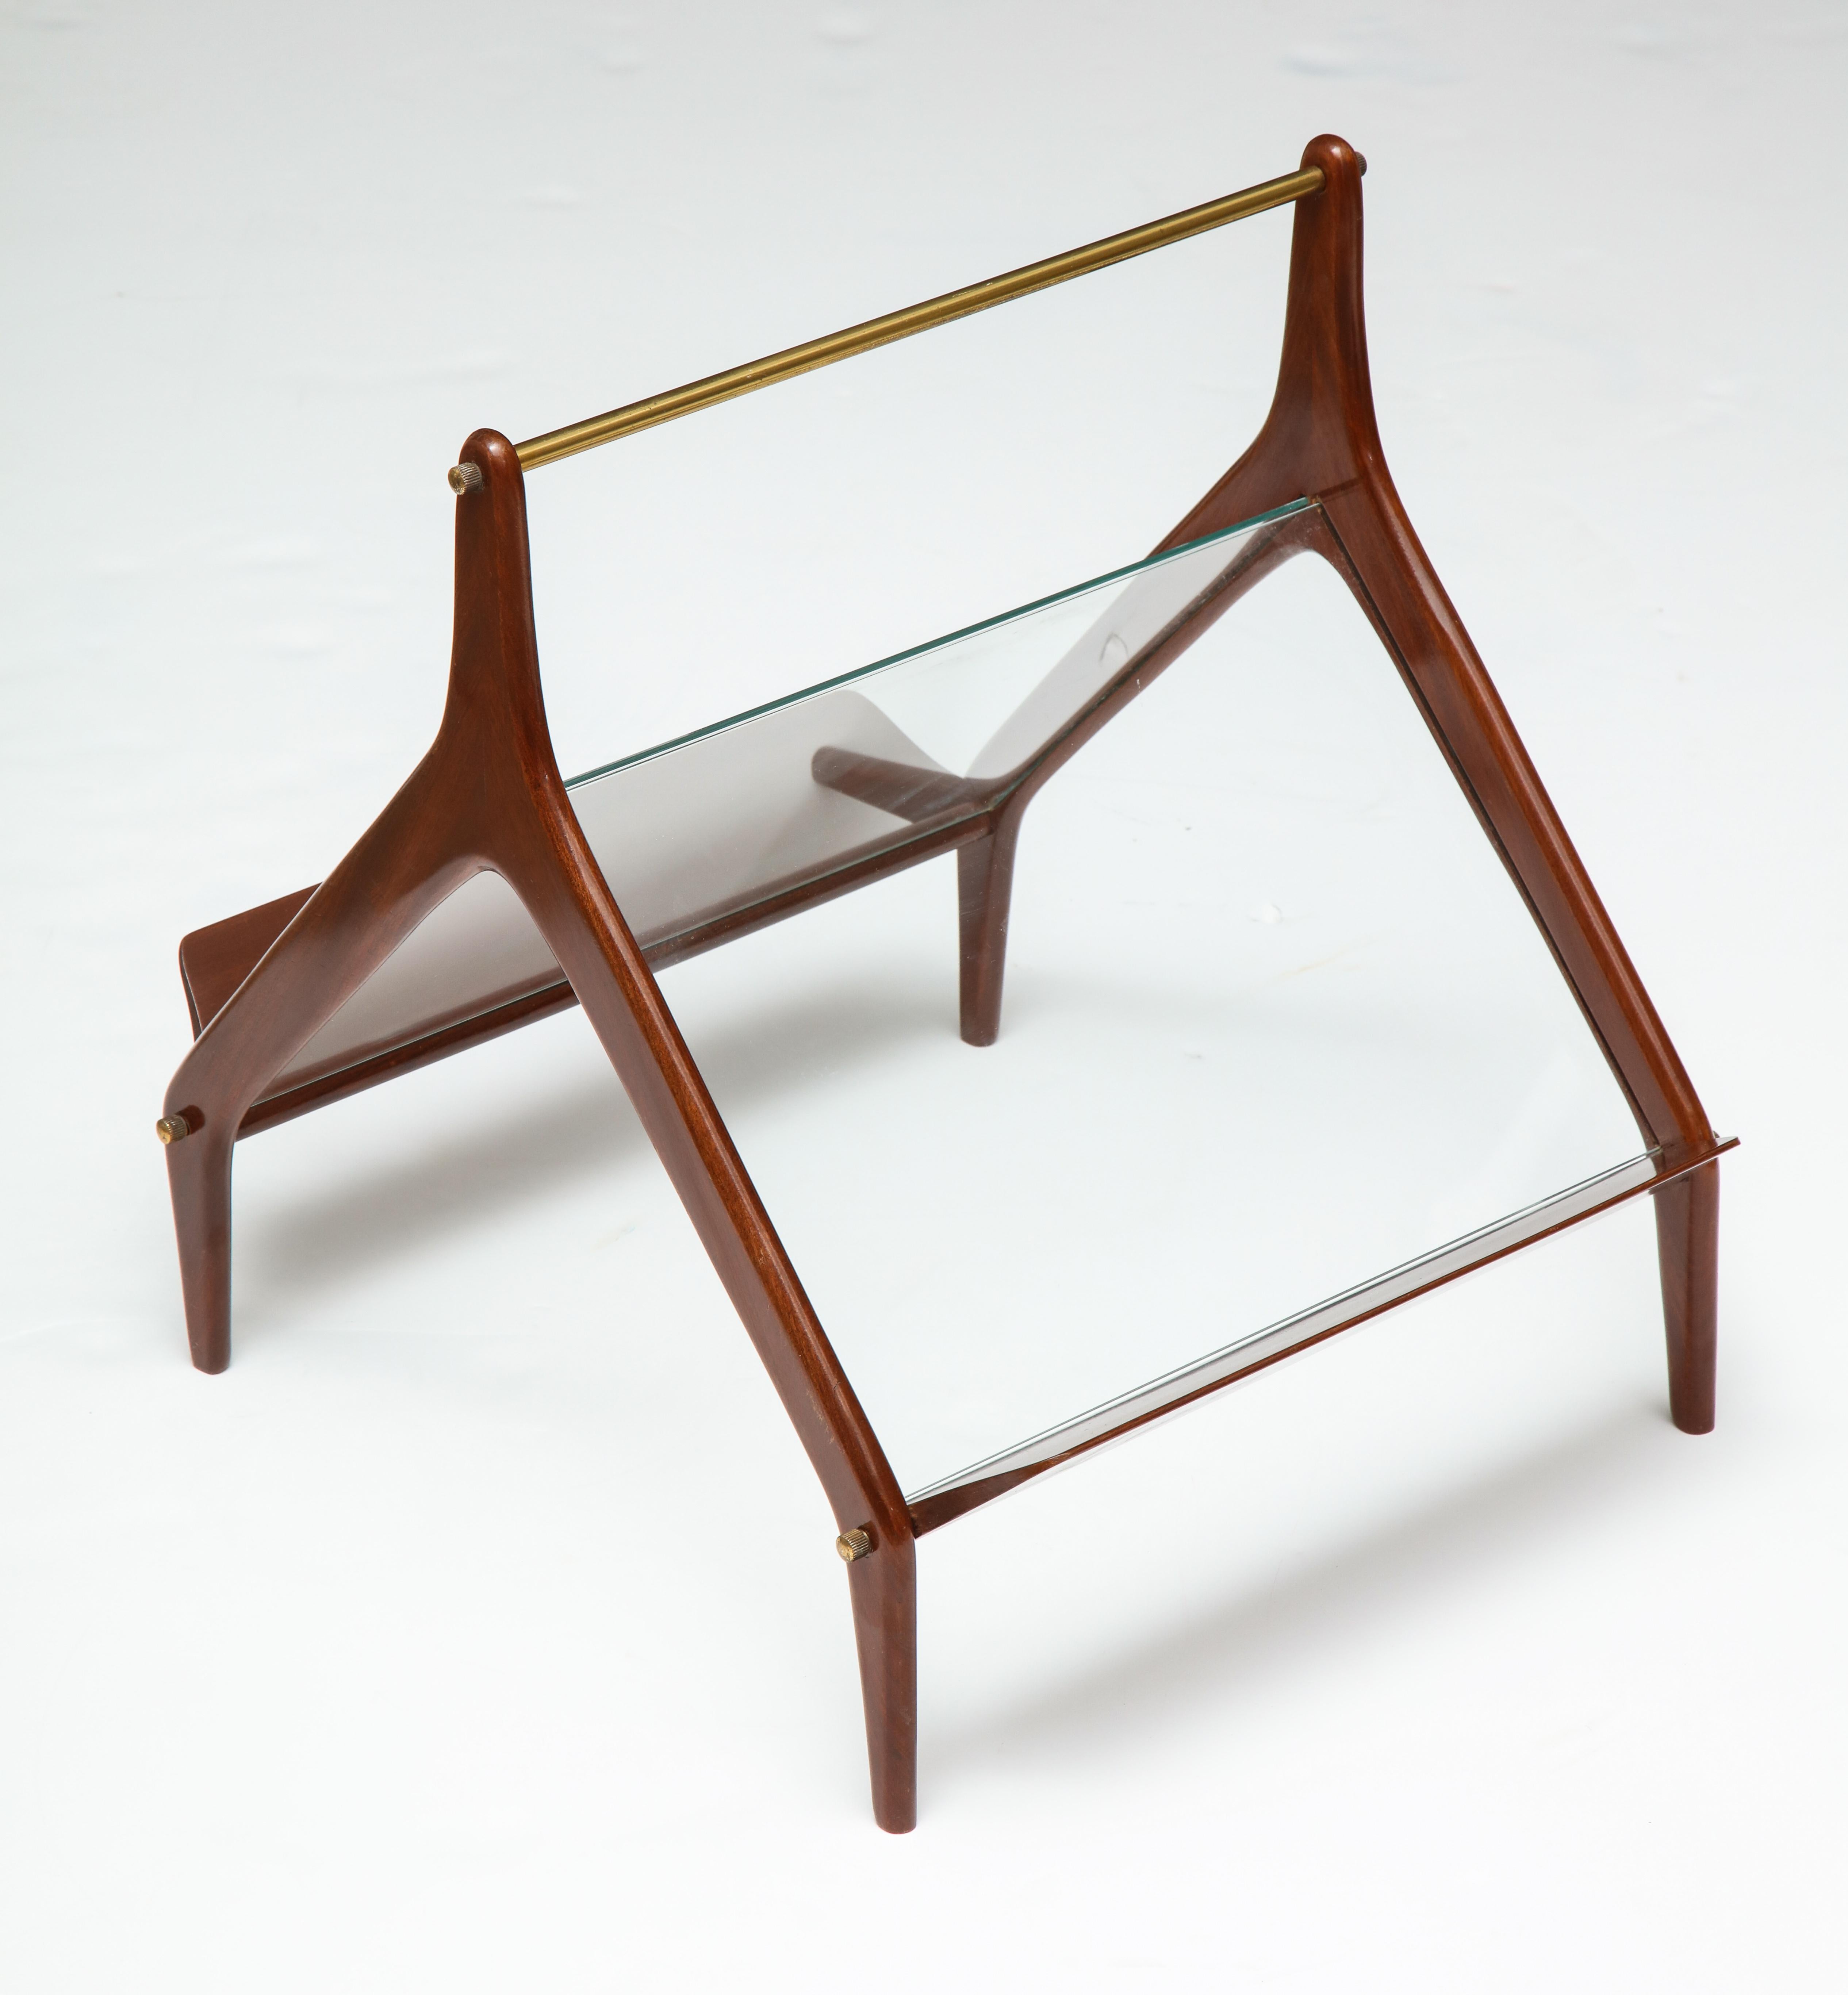 Italian Modernist Magazine Rack Attributed to Ico Parisi, Italy, 1950s For Sale